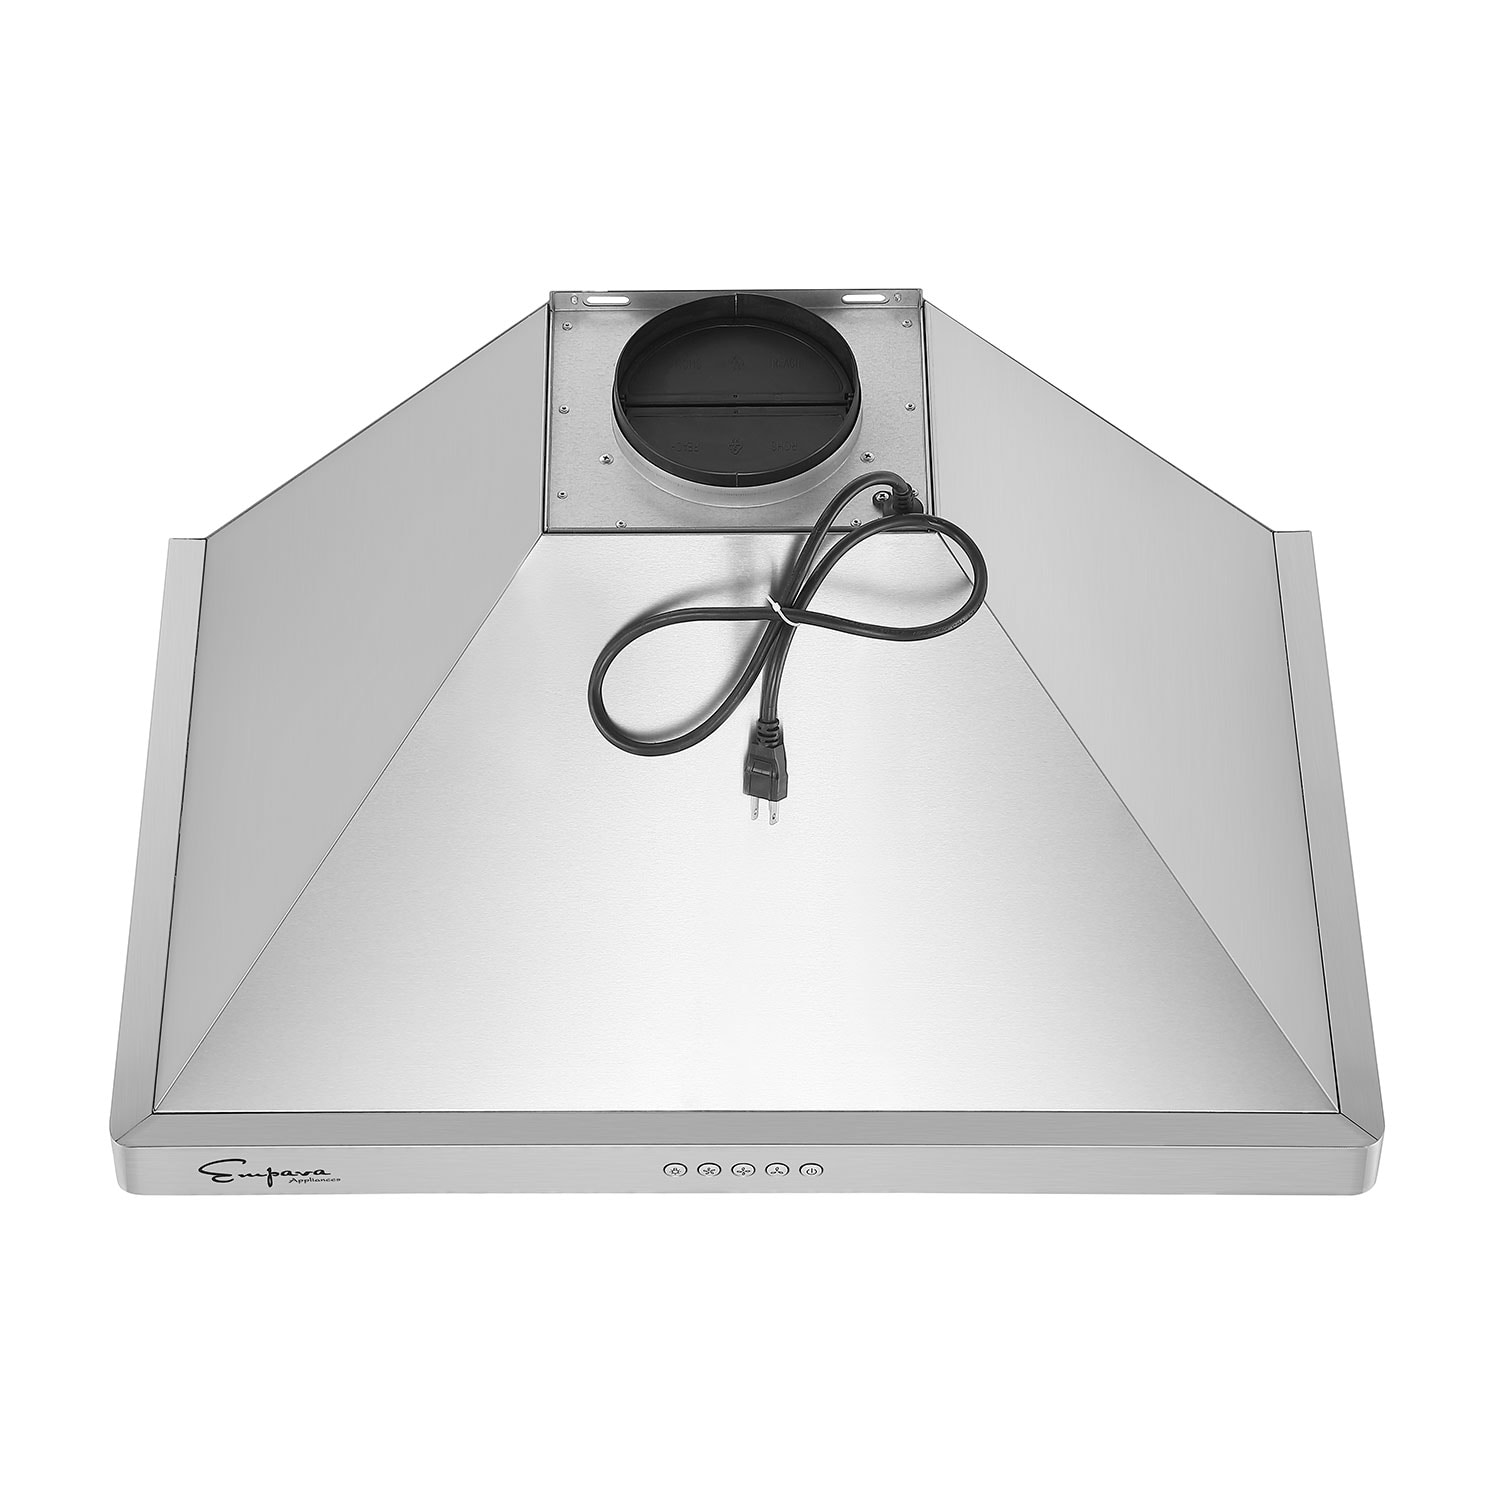 Details about   Empava 30 in Ducted Exhaust Kitchen Vent 400 CFM Wall Mount Range Hood 